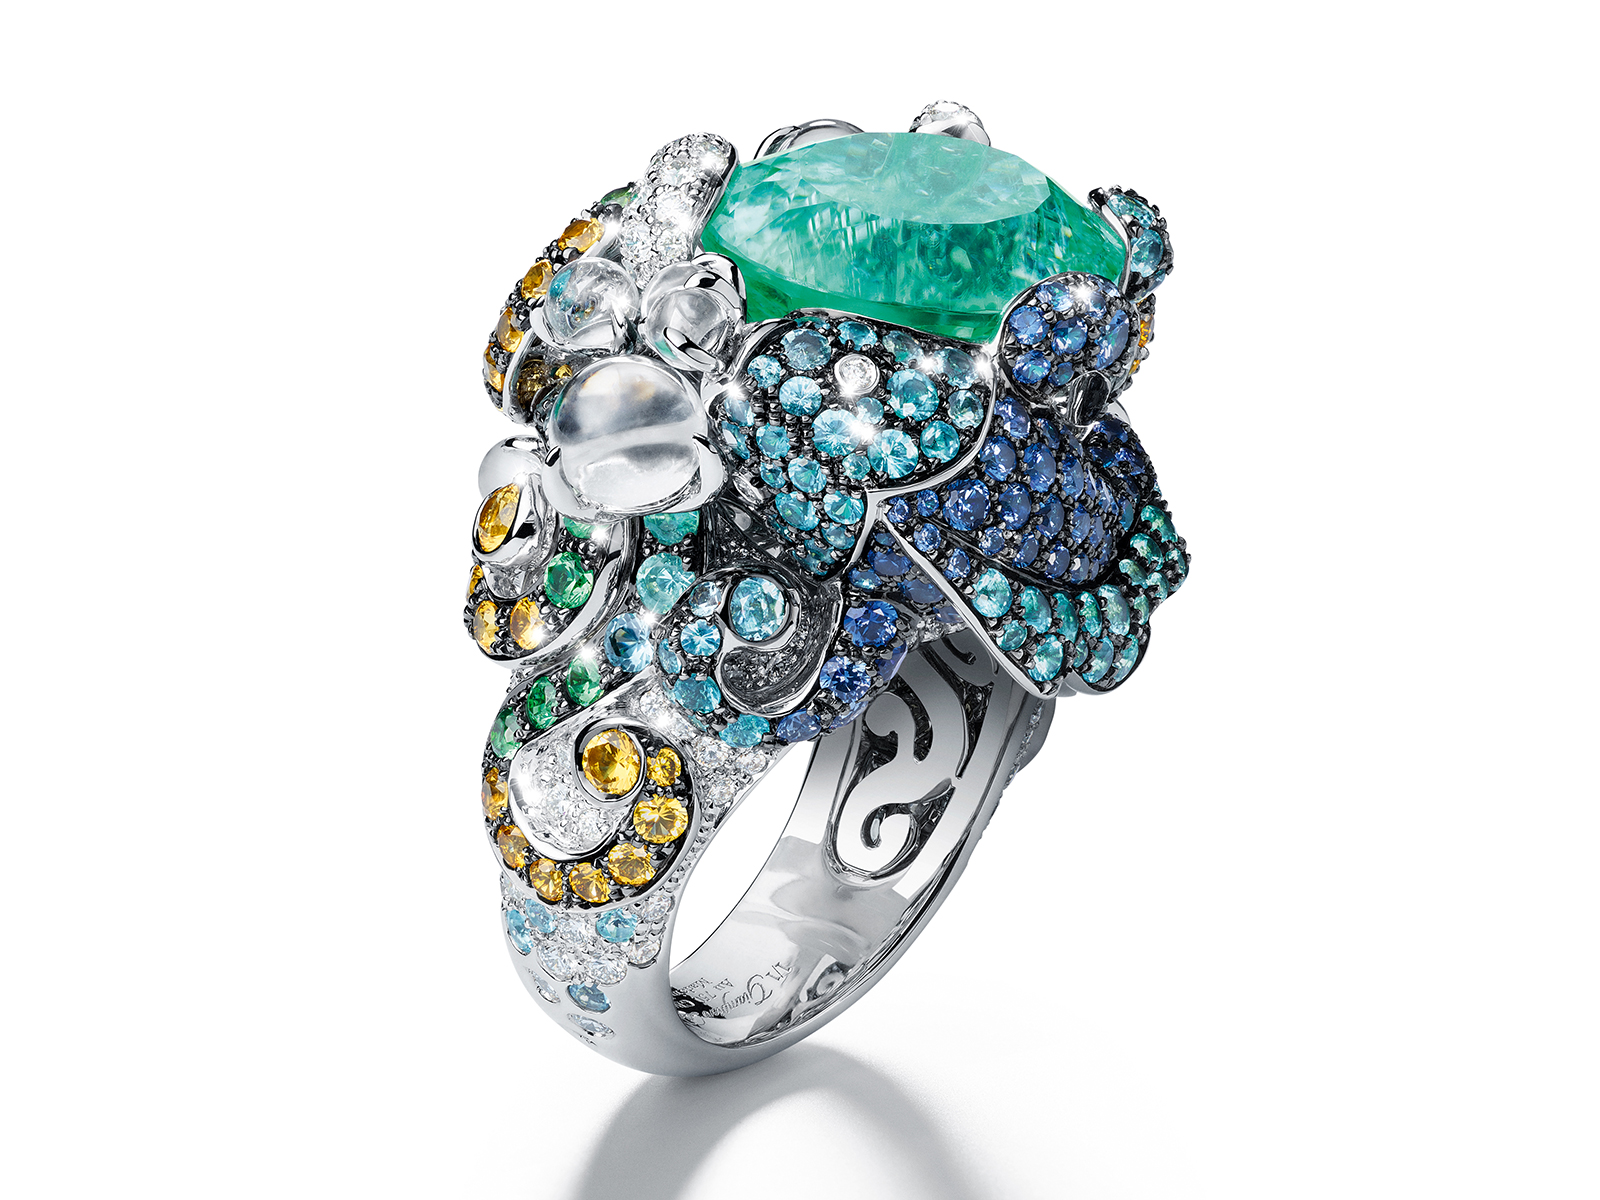 Statement gemstones: enchanting beauty inside and out